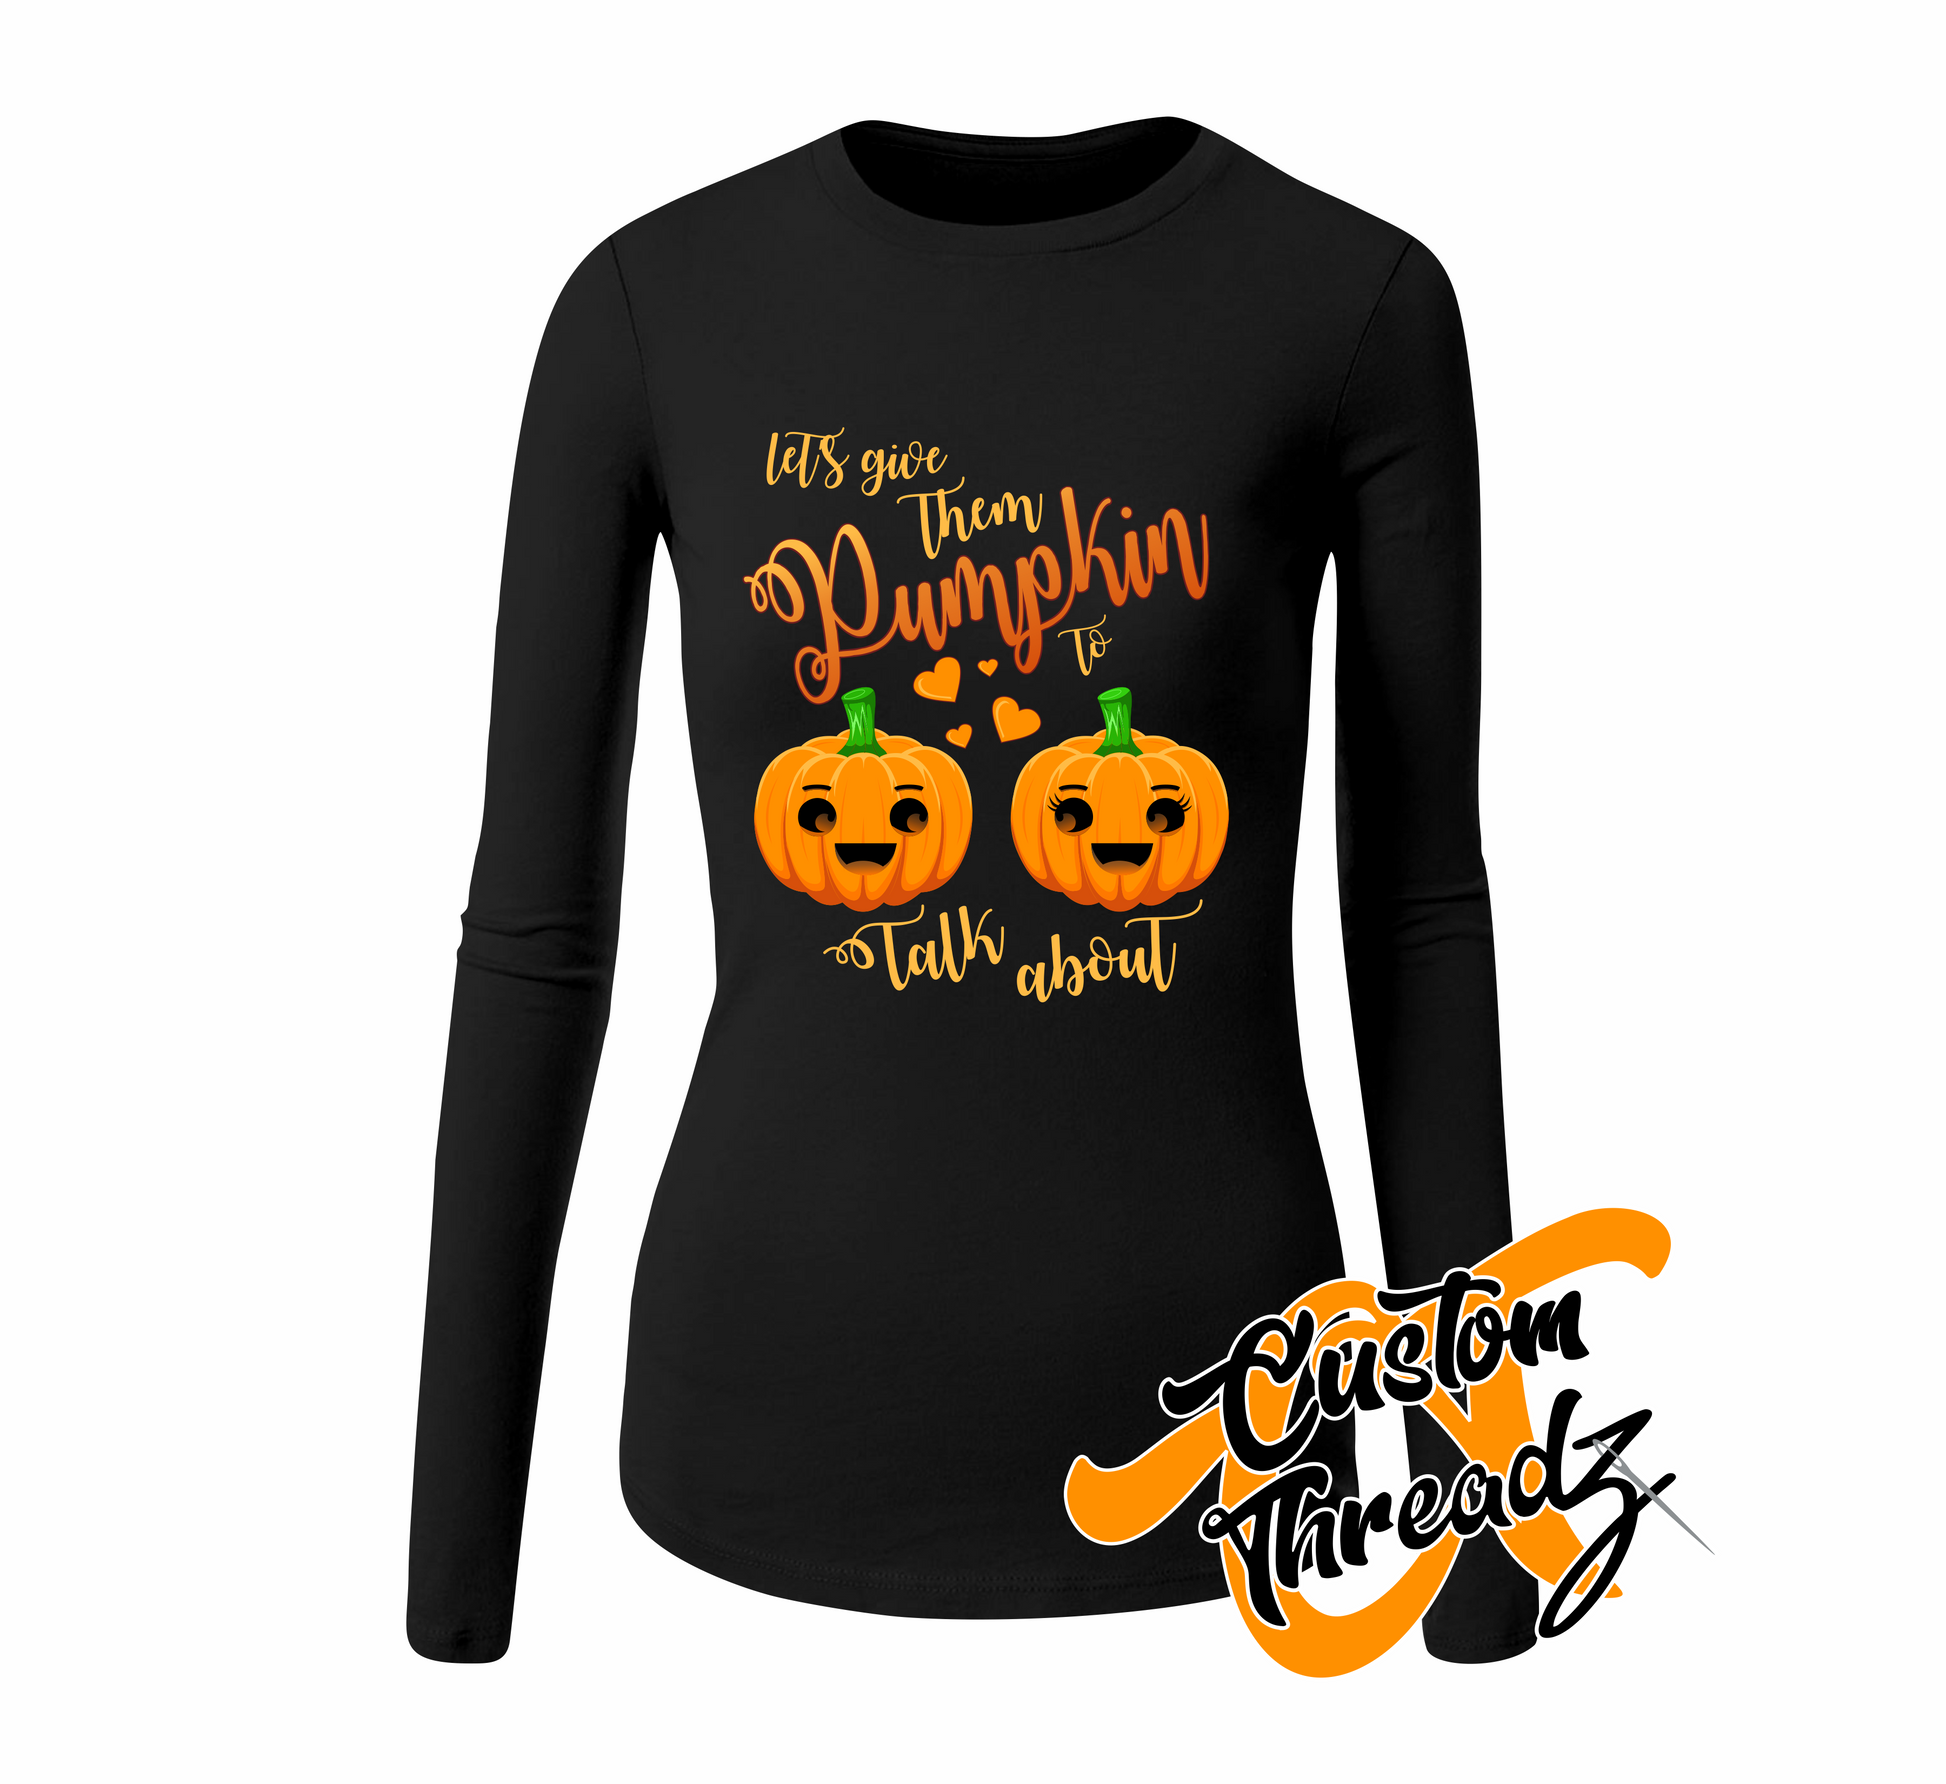 black womens long sleeve tee with lets give them pumpkin to talk about halloween DTG printed design